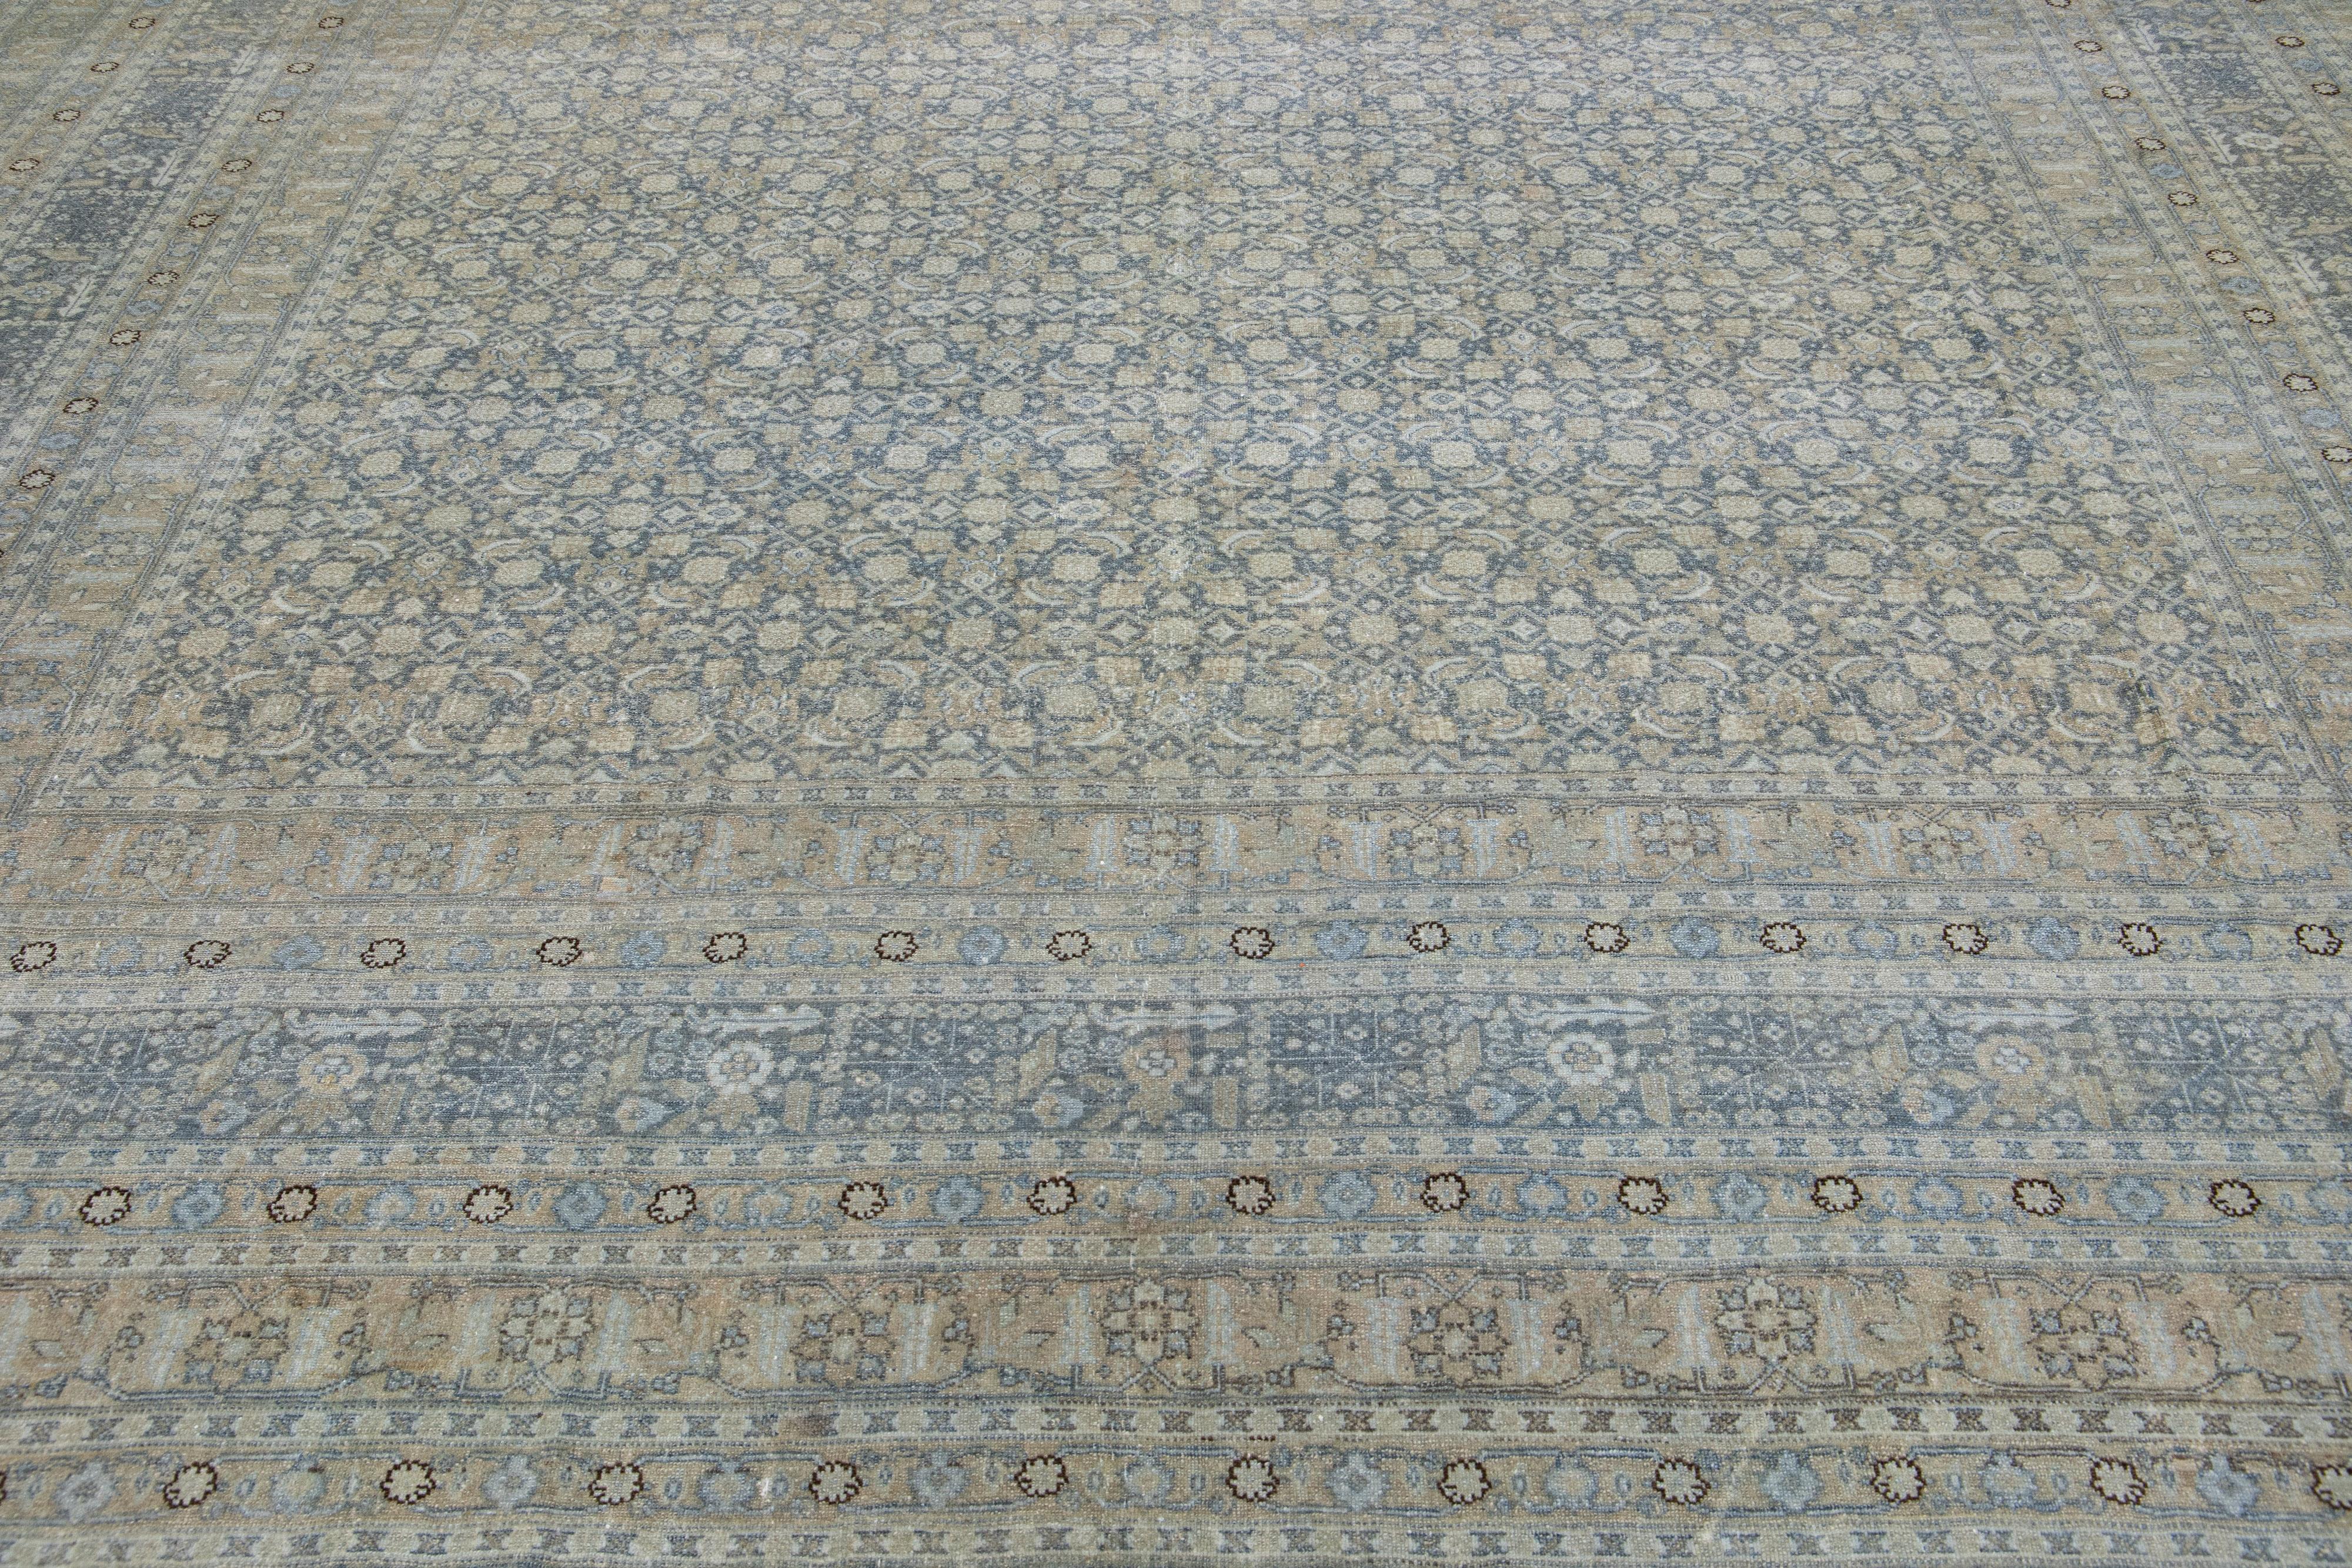 Beautiful antique Malayer hand knotted wool rug with a gray color field. This Persian rug has a gorgeous all-over floral design with blue, beige, and brown accents.

This rug measures: 11'9